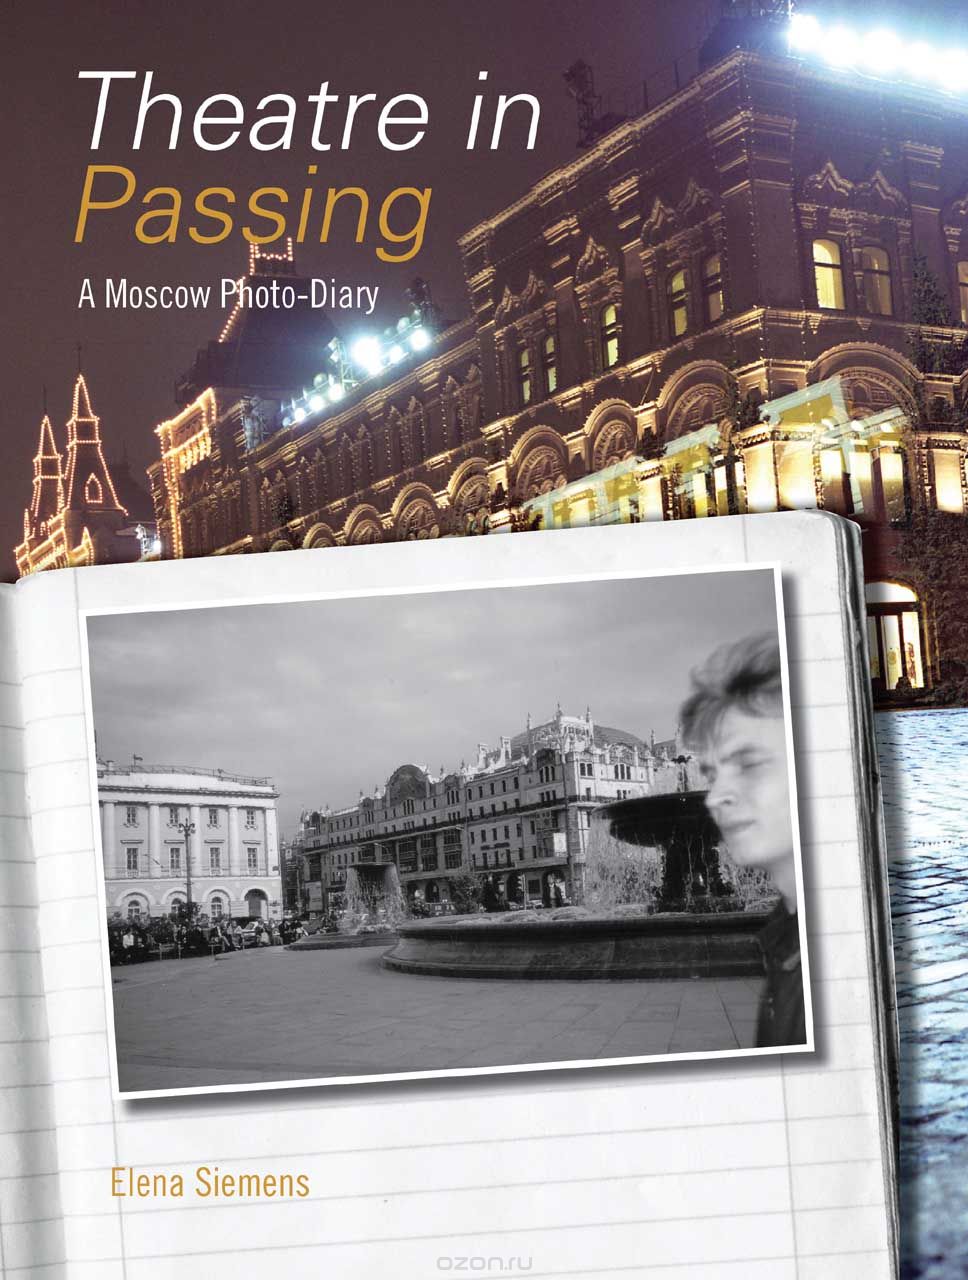 Скачать книгу "Theatre in Passing – A Moscow Photo–Diary"